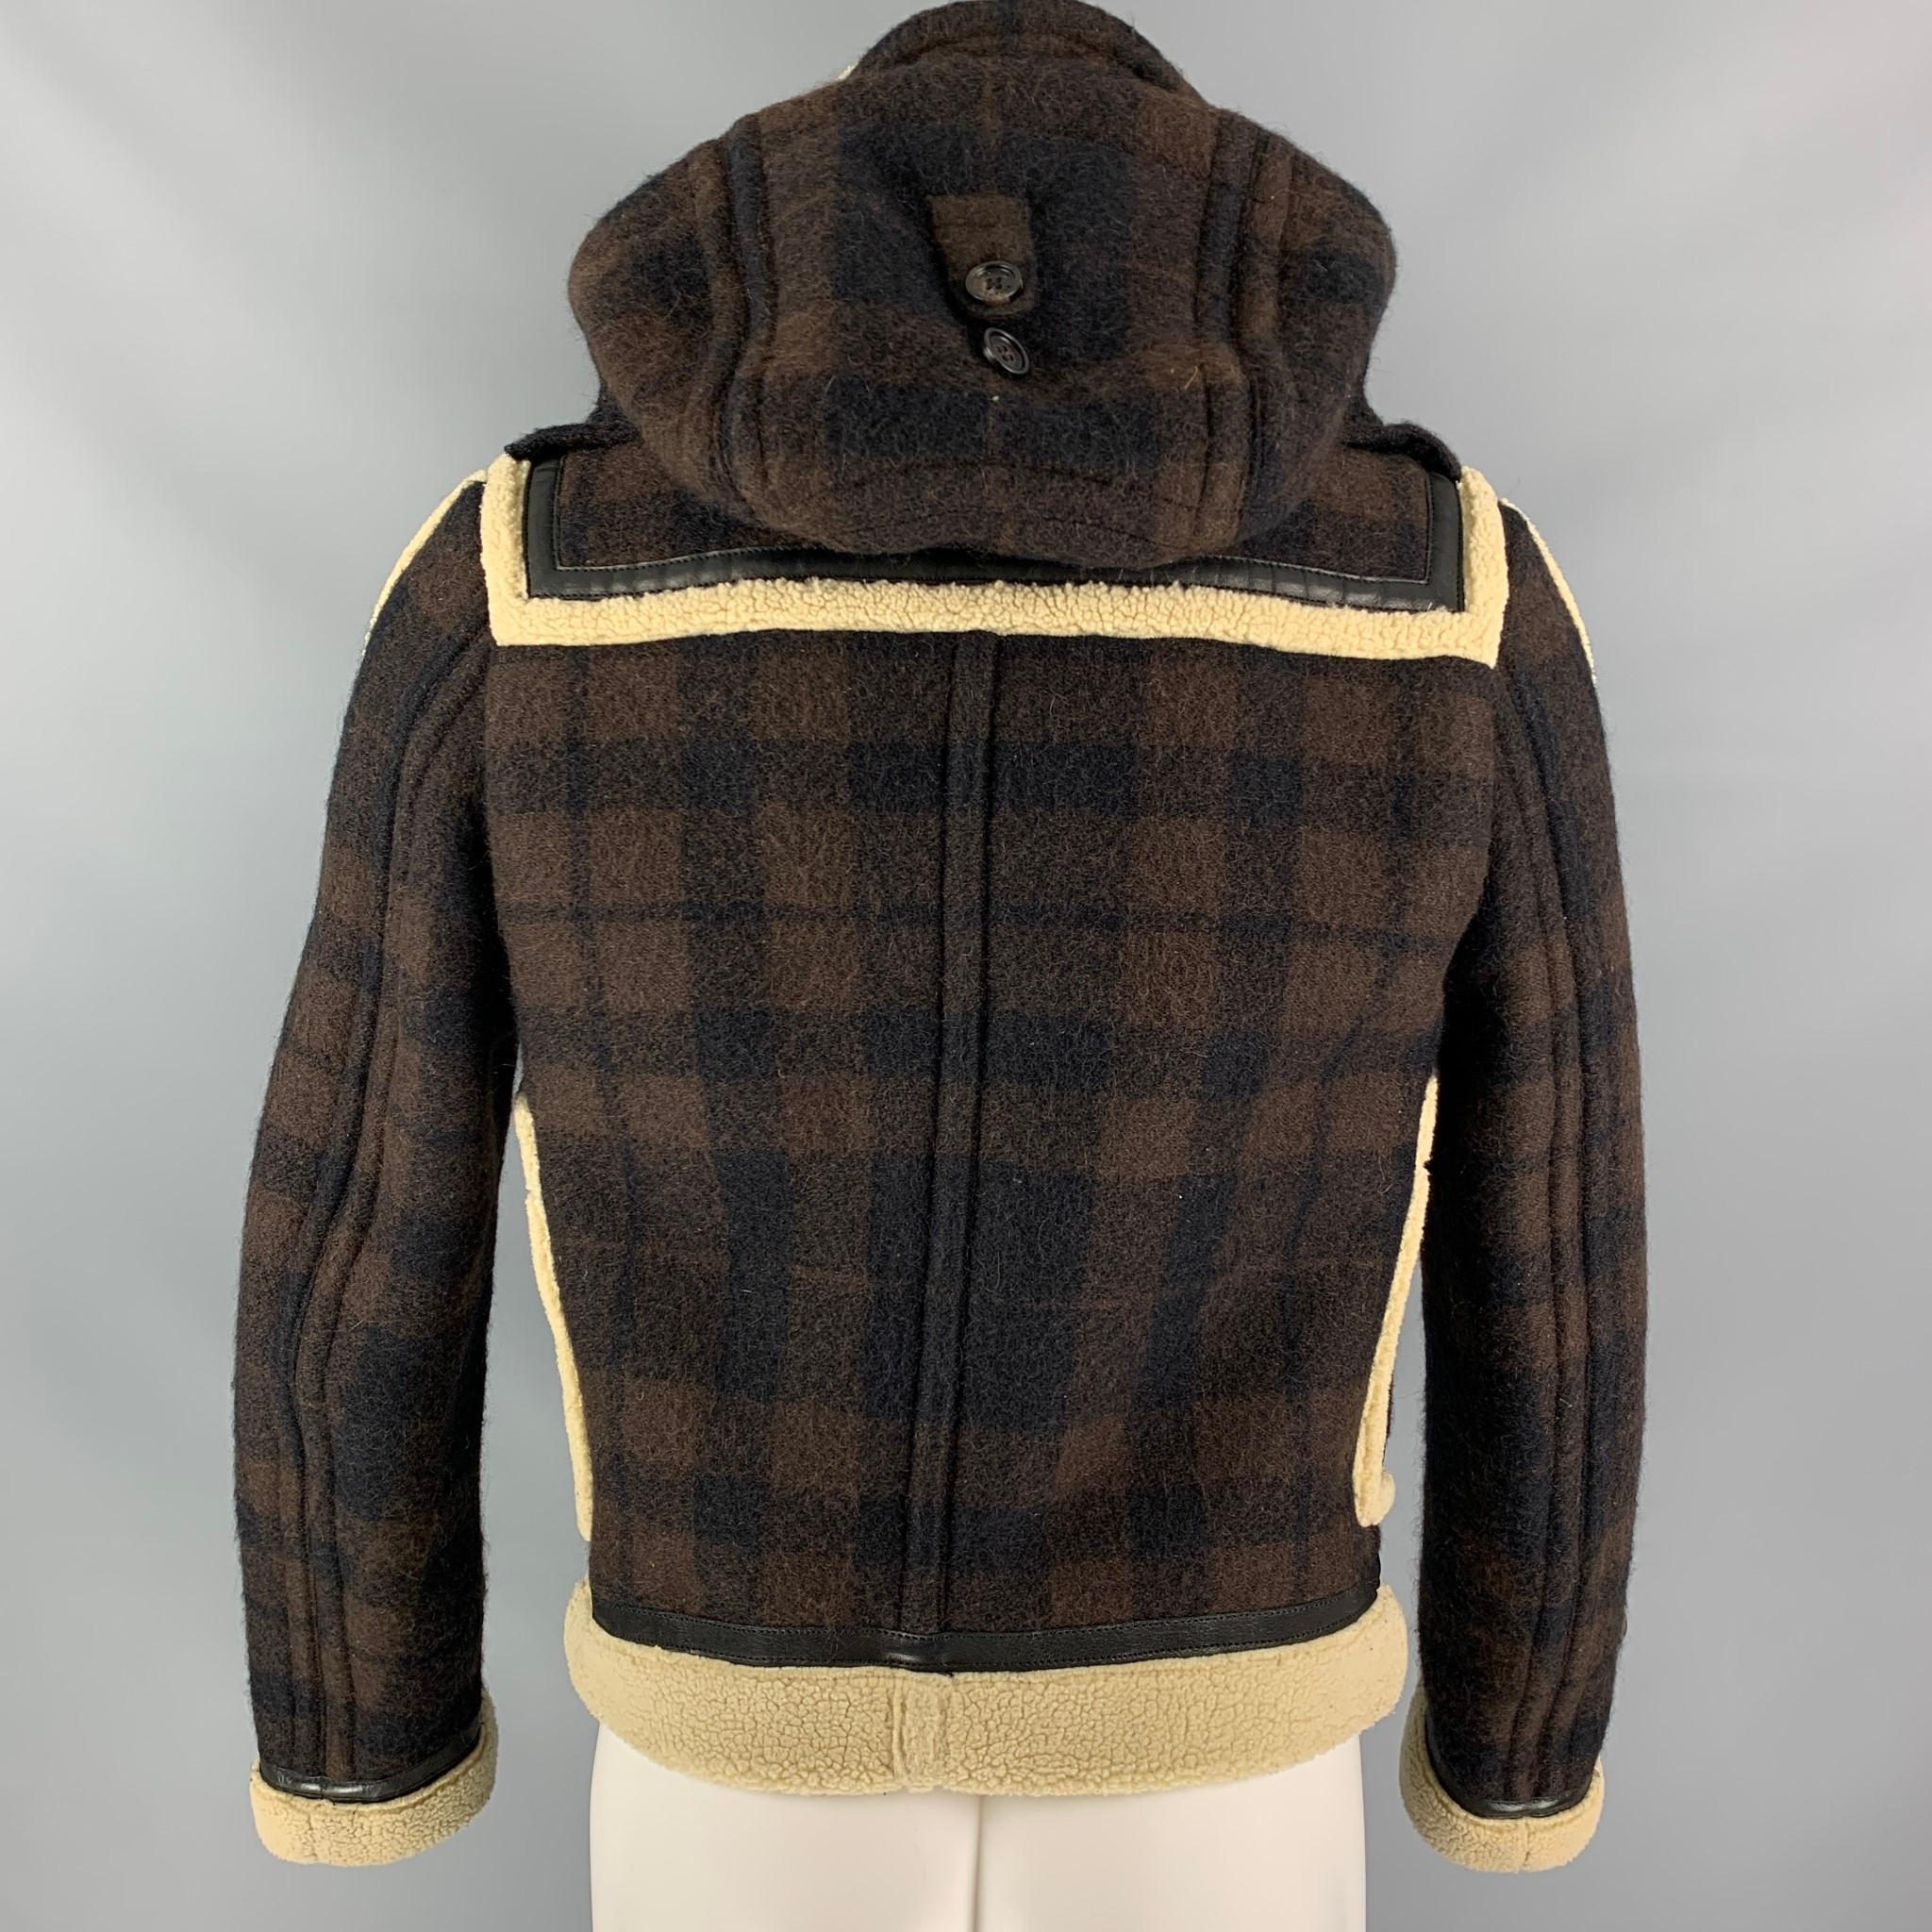 Men's BURBERRY PRORSUM Fall 2011 Size 34 Brown & Cream Plaid Leather Shearling Jacket